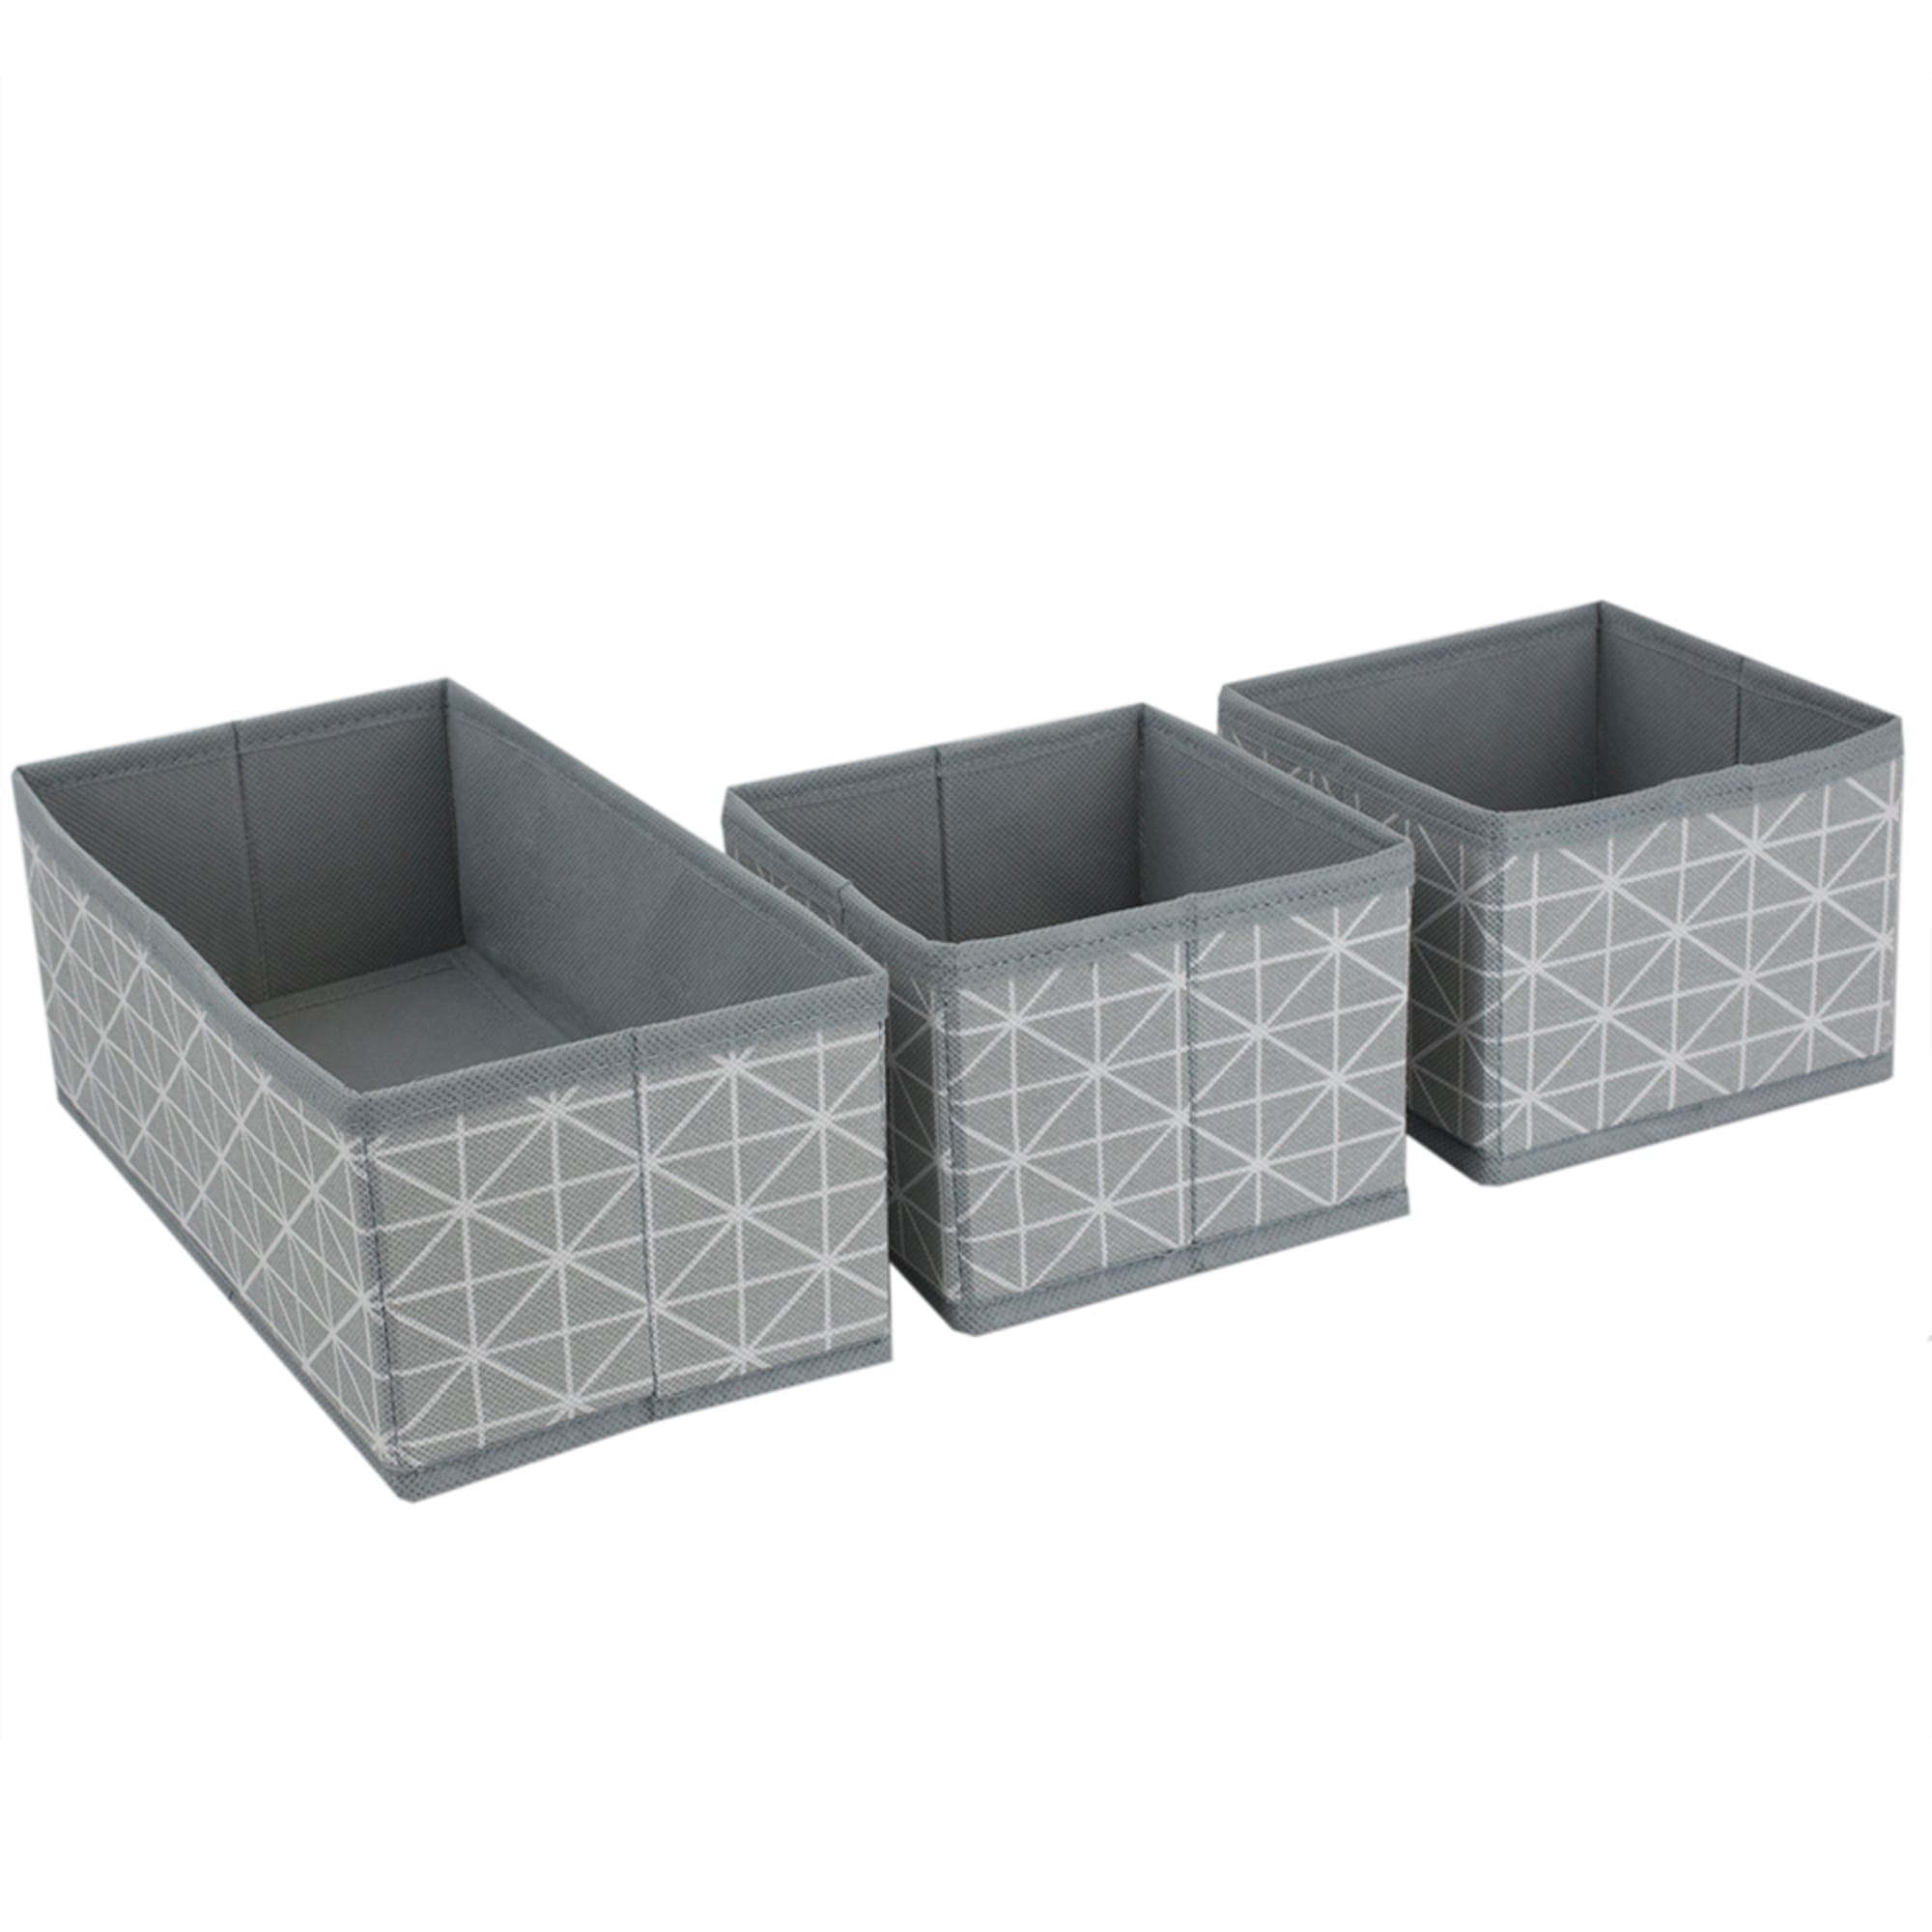 Home Basics Diamond Collection 3 Piece Drawer Organizer Set $4.00 EACH, CASE PACK OF 12